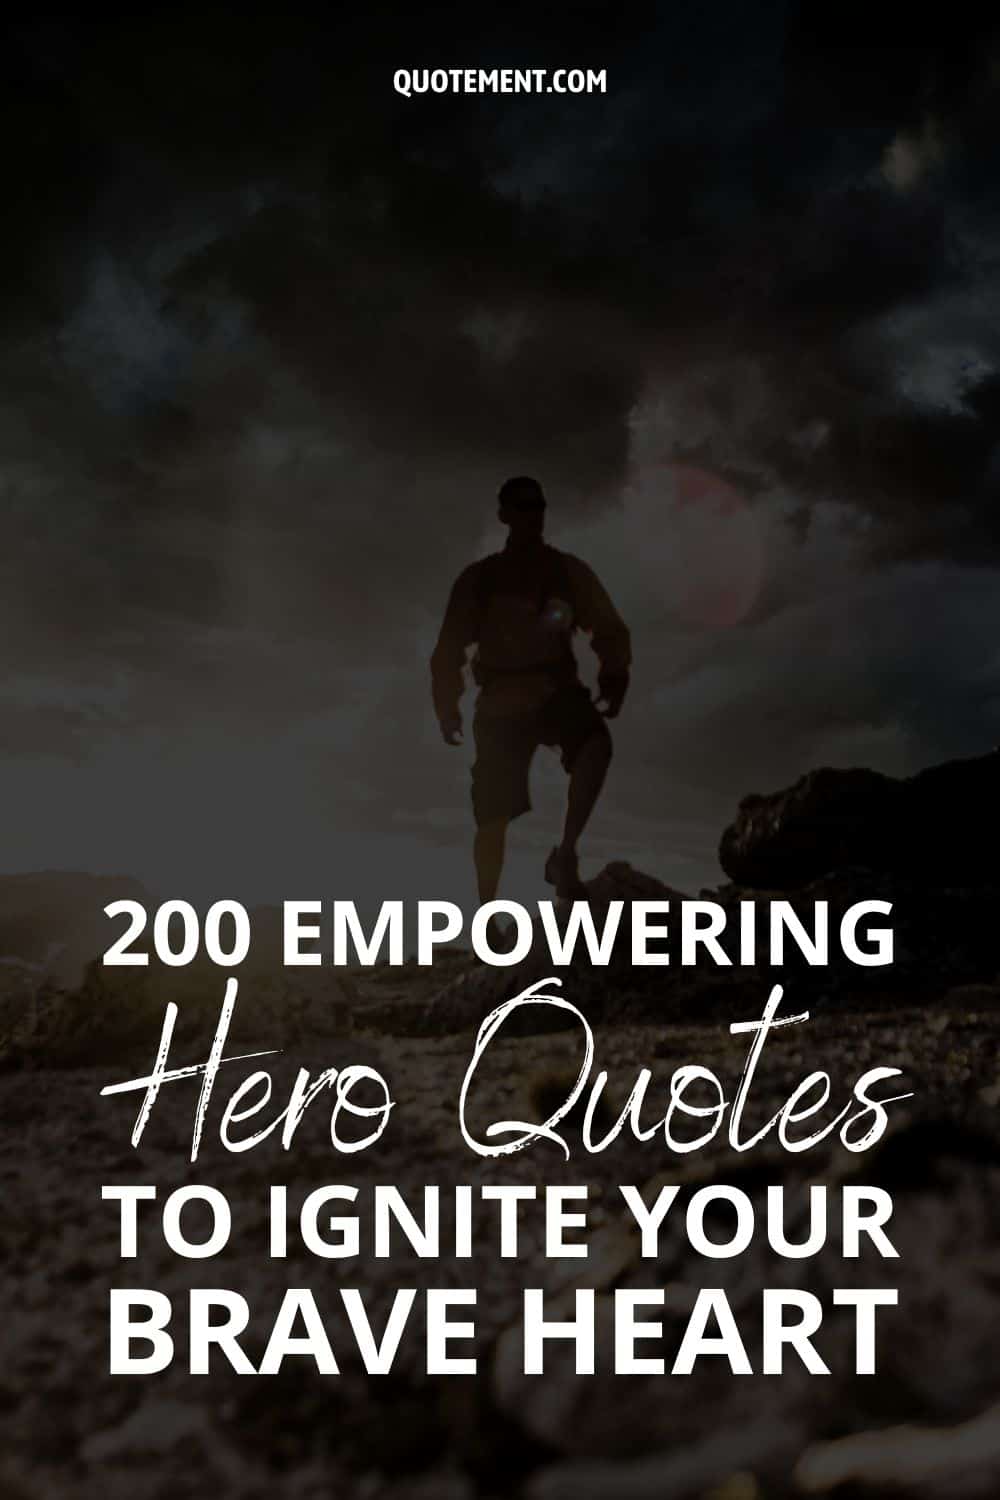 200 Empowering Hero Quotes To Ignite Your Brave Heart
